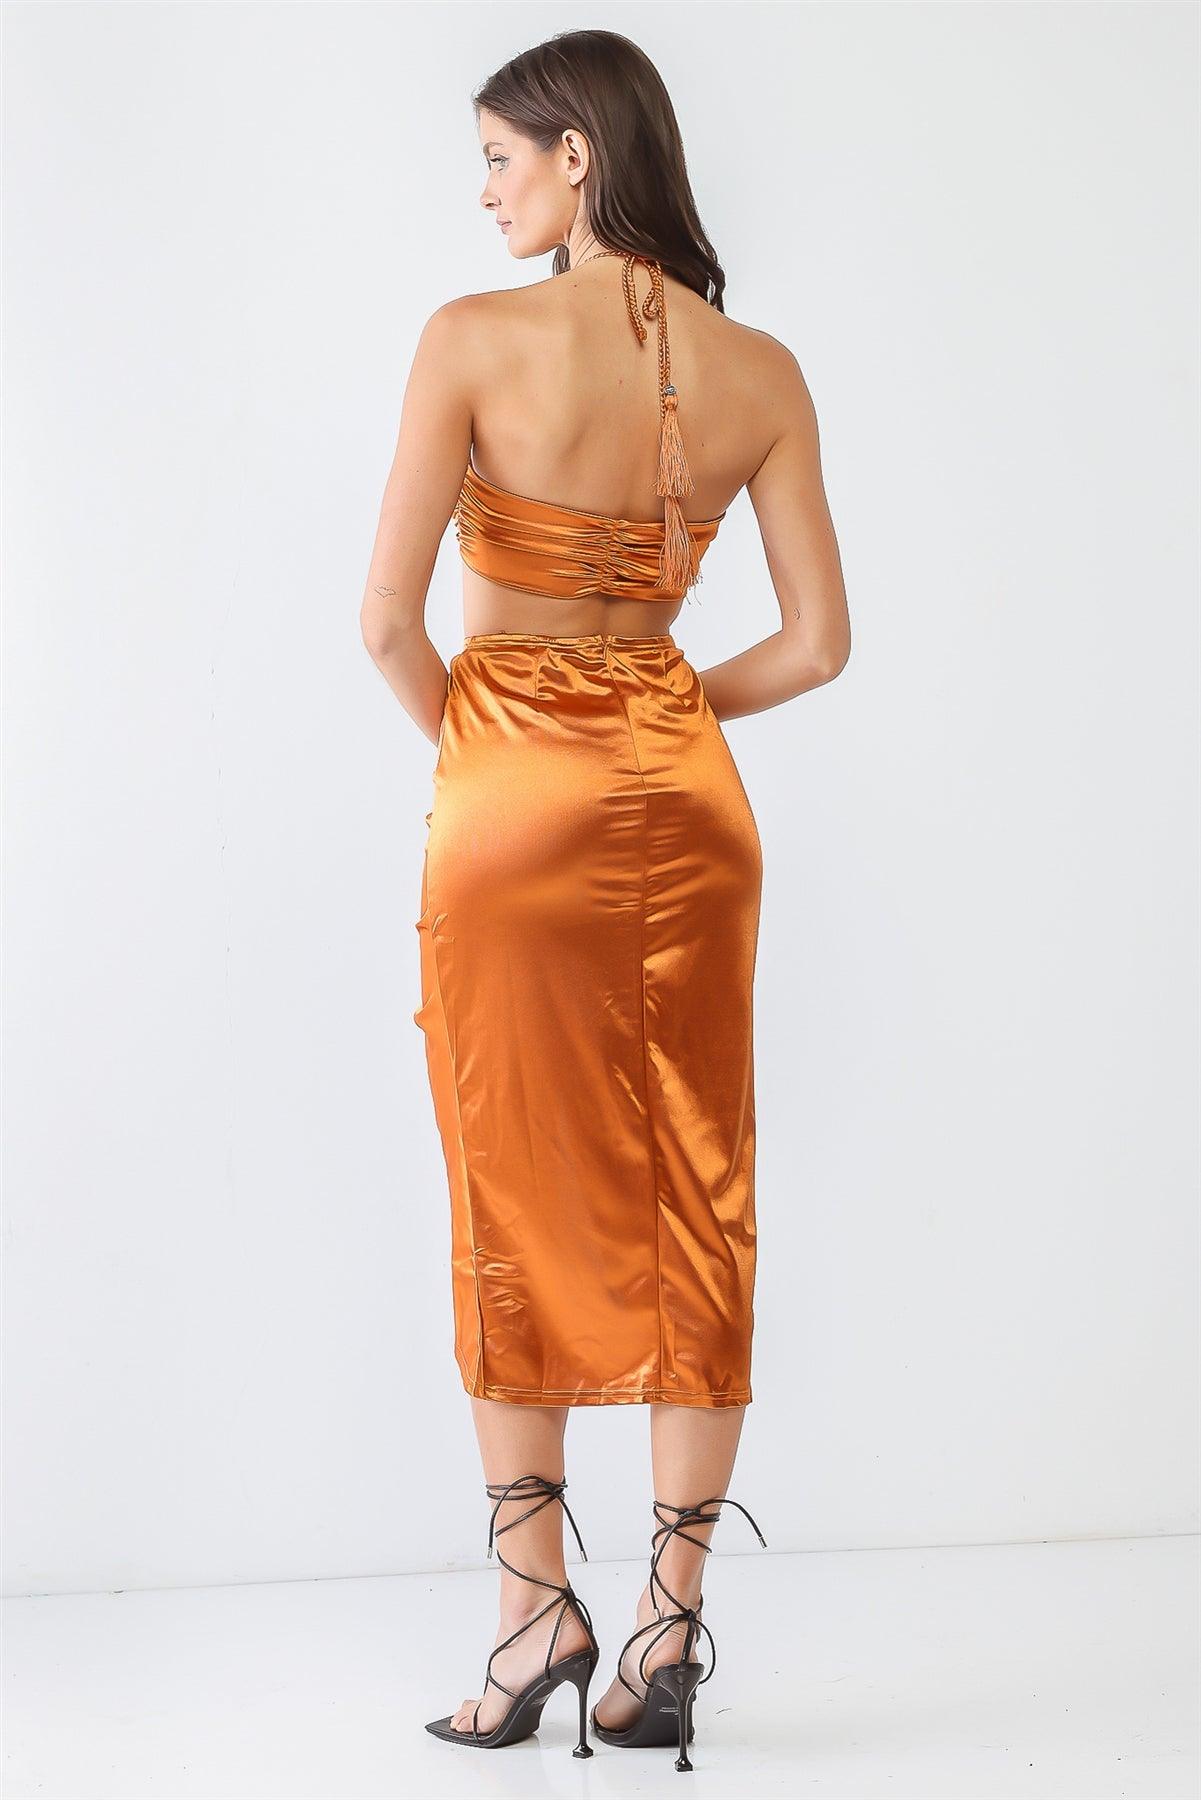 Copper Satin Bow Crop Top & High Waist Ruched Midi Skirt With Criss-Cross Strap Set /3-2-1